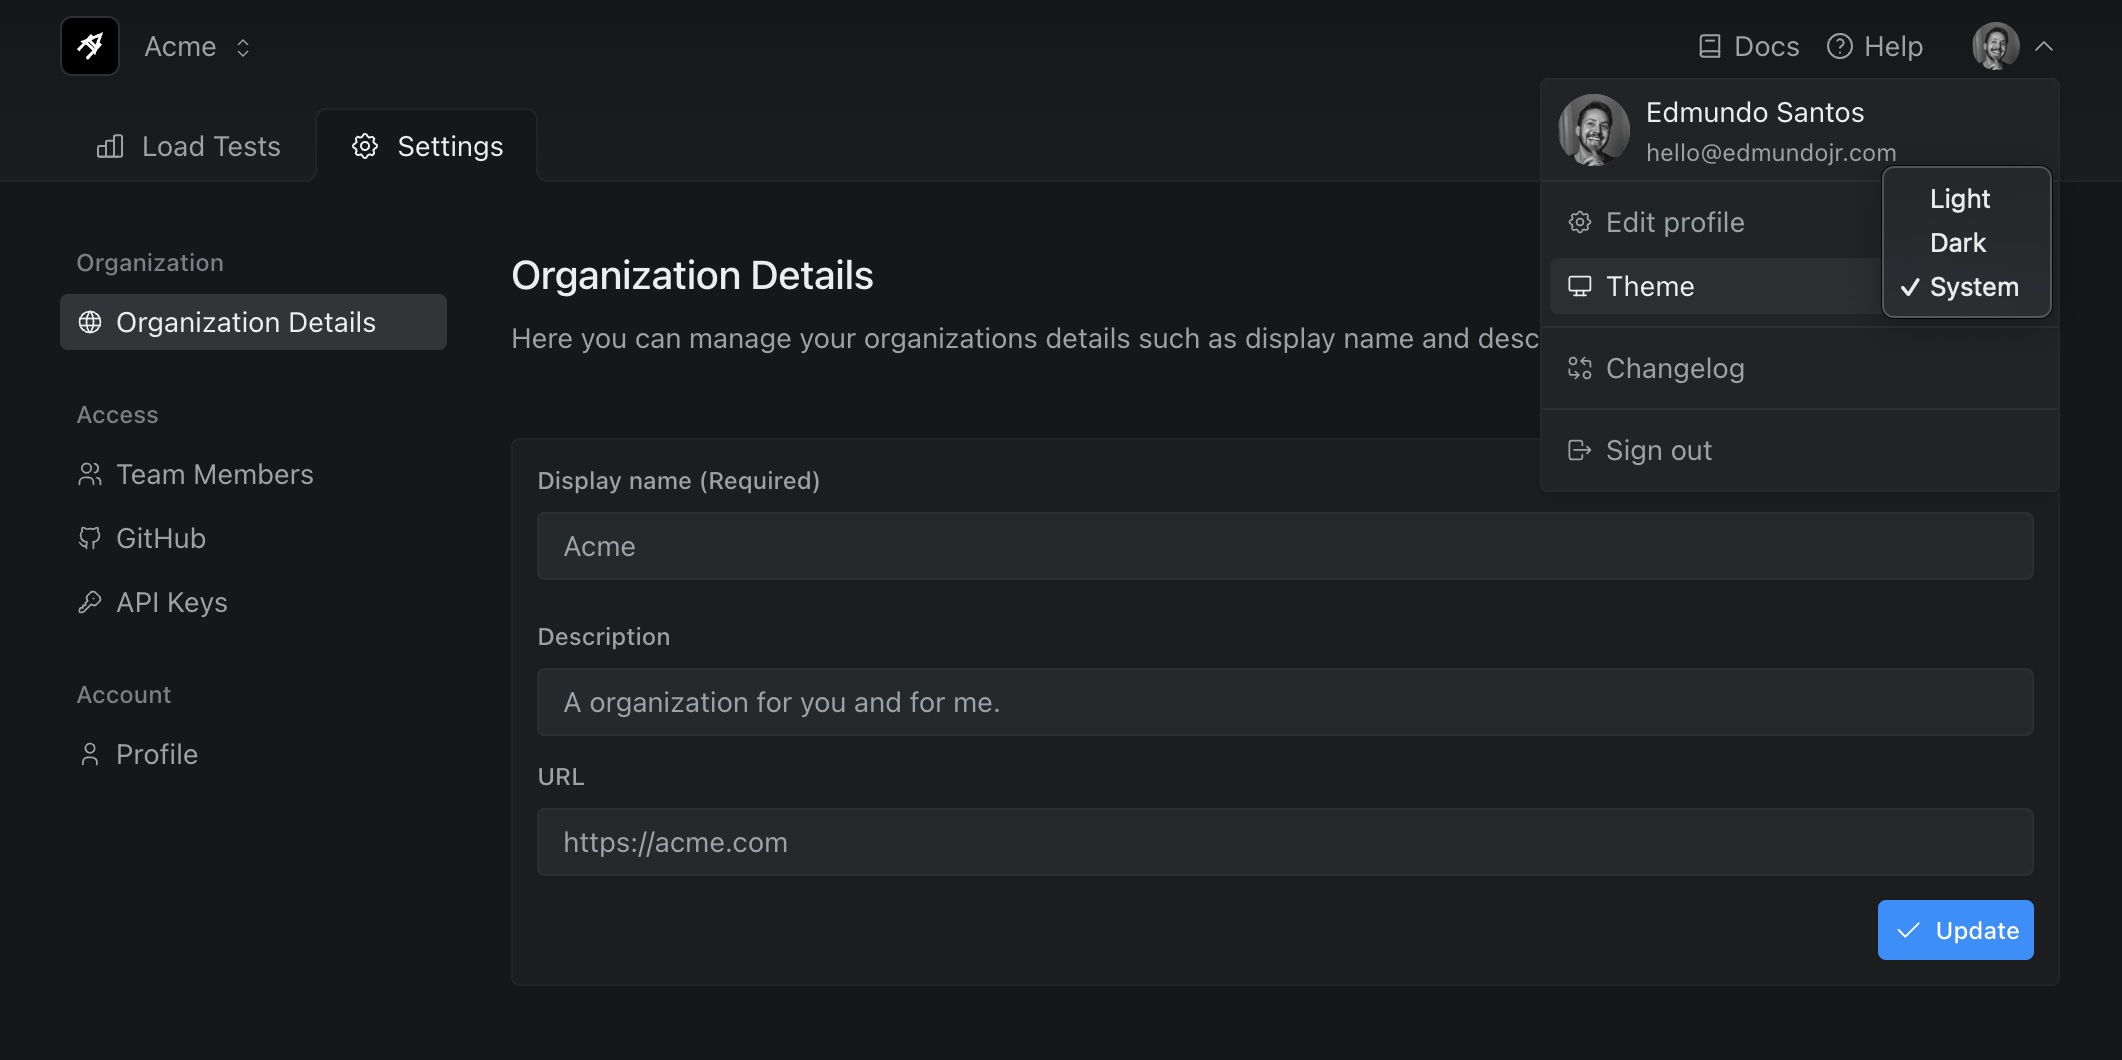 Organization Details and System Theme